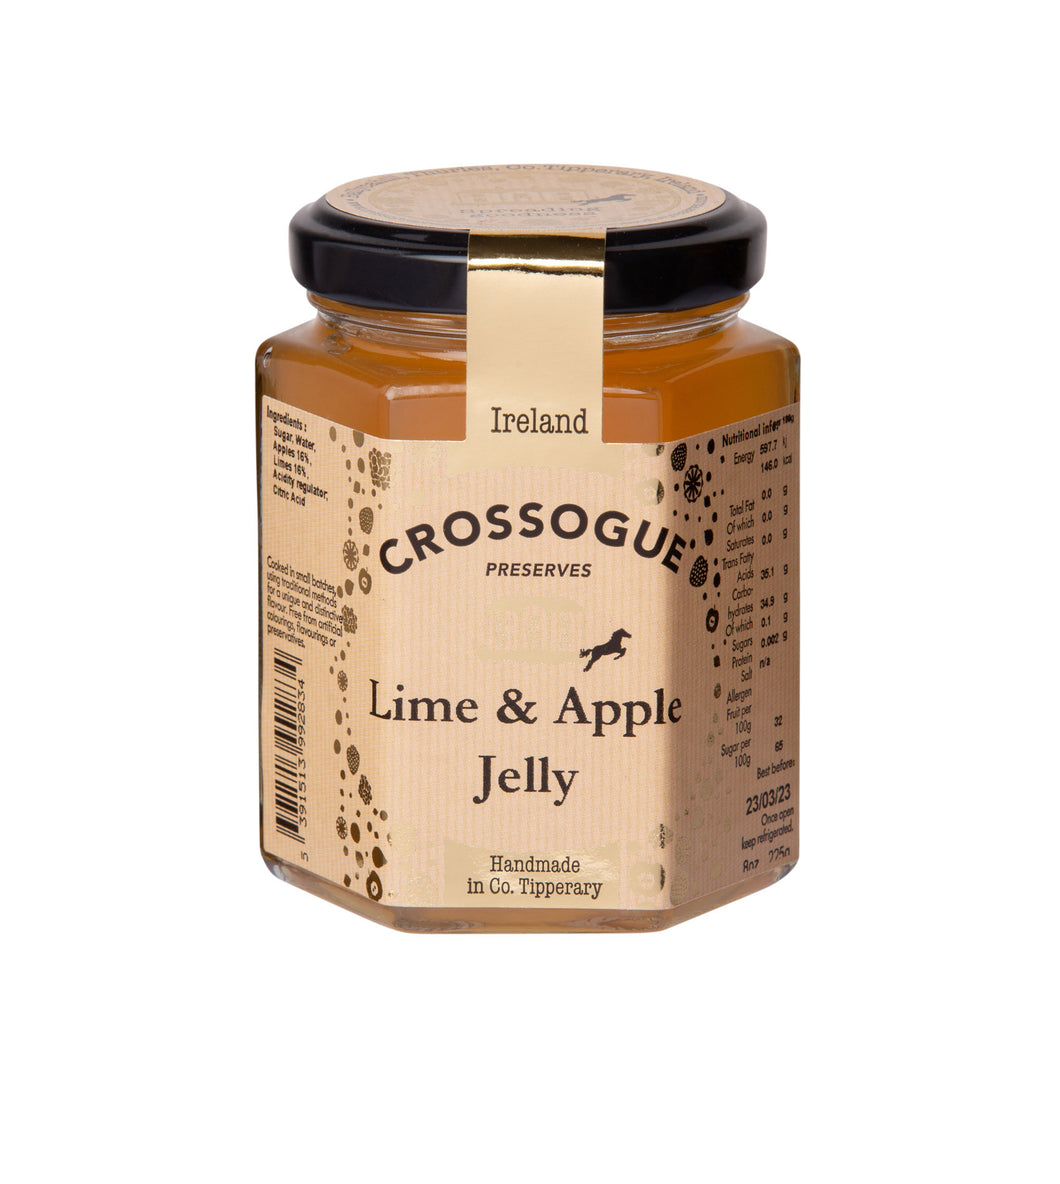 Lime & Apple Jelly